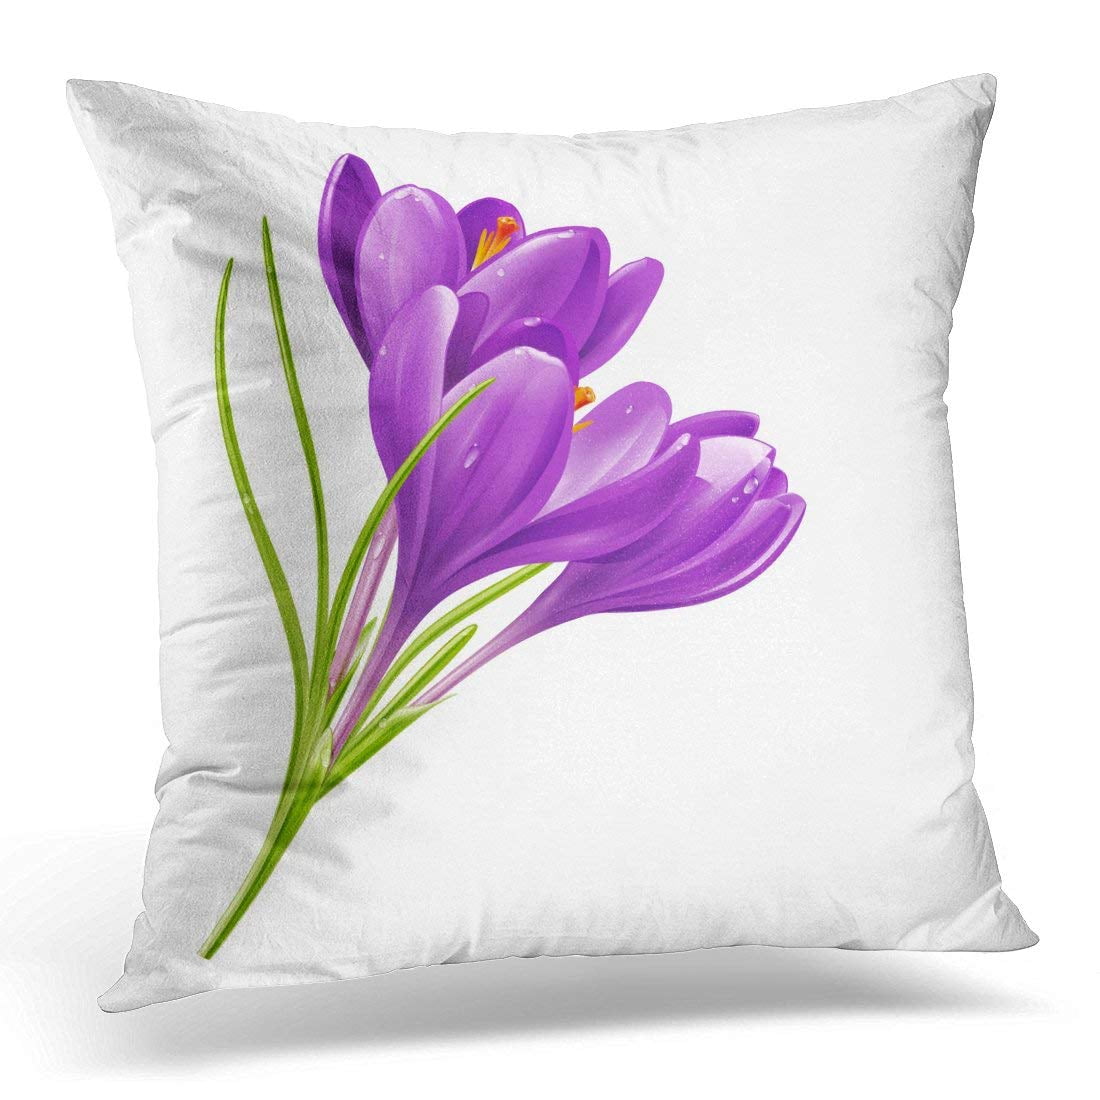 The Sleepy Throw Pillow Shop Purple Blooming Wisteria Flowering Plant Lover Floristry Throw Pillow Multicolor Decorative Pillows 18x18